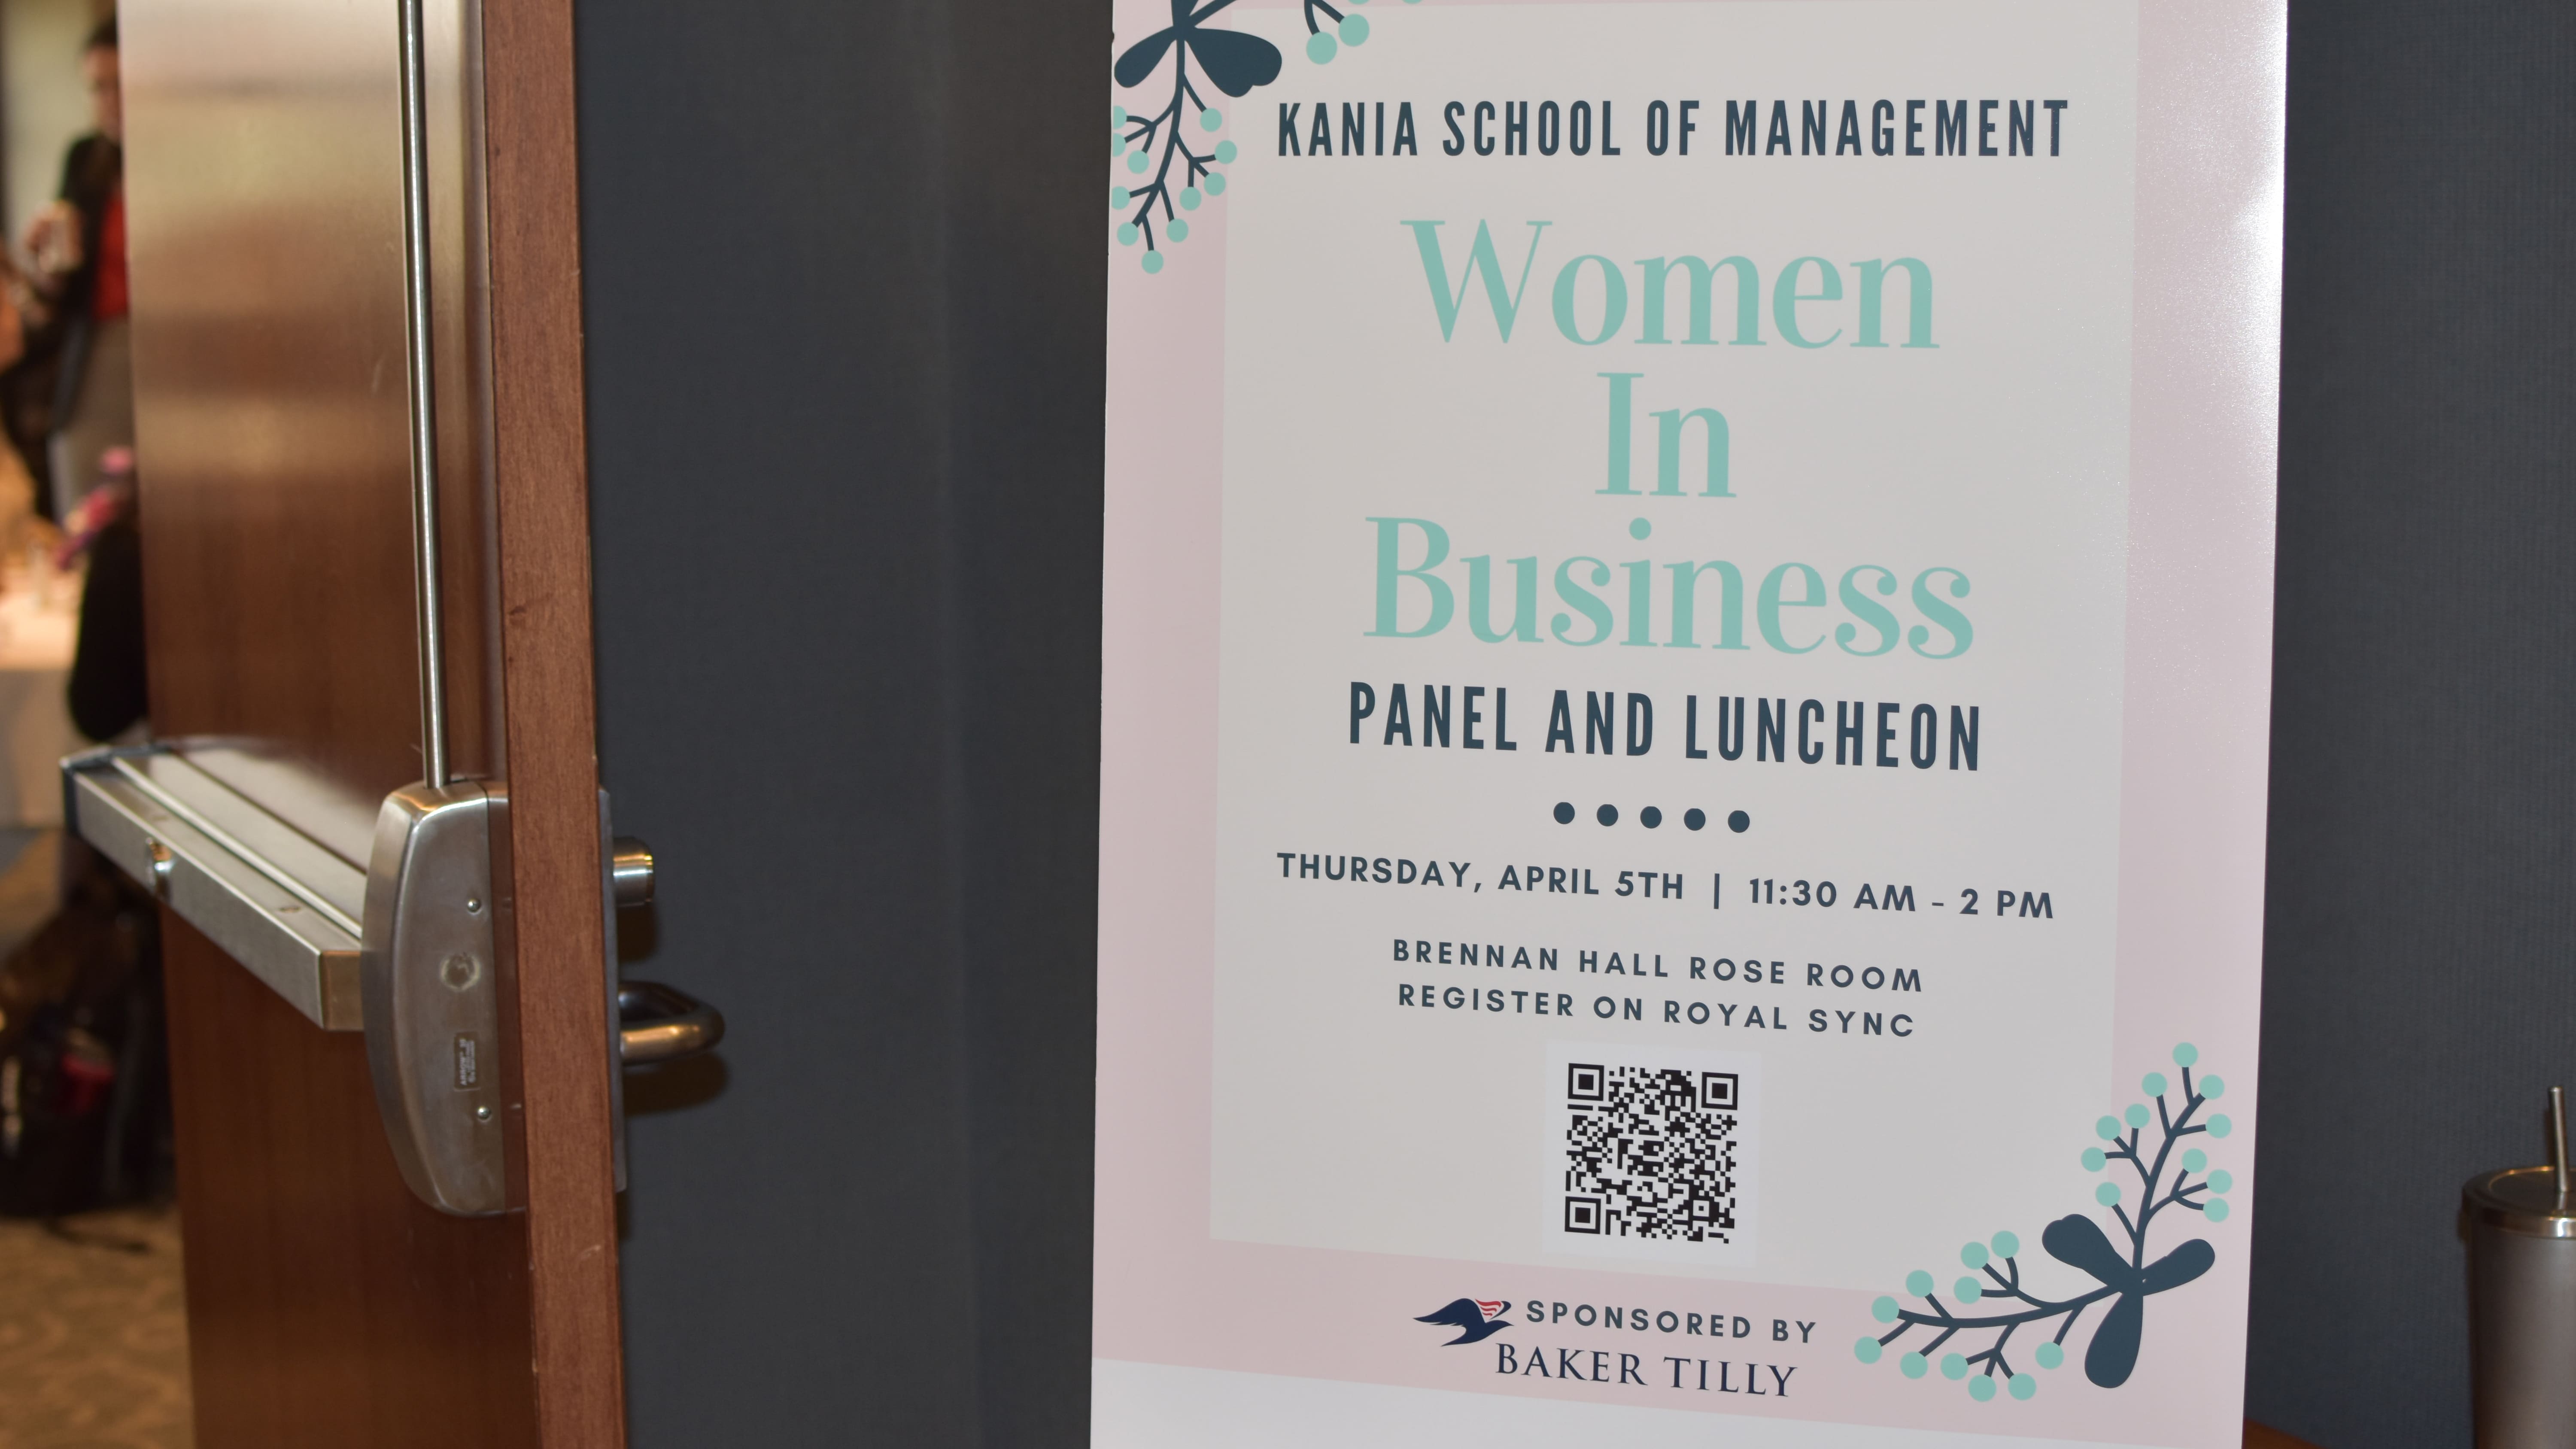 KSOM Hosts Women In Business Panel And Luncheon